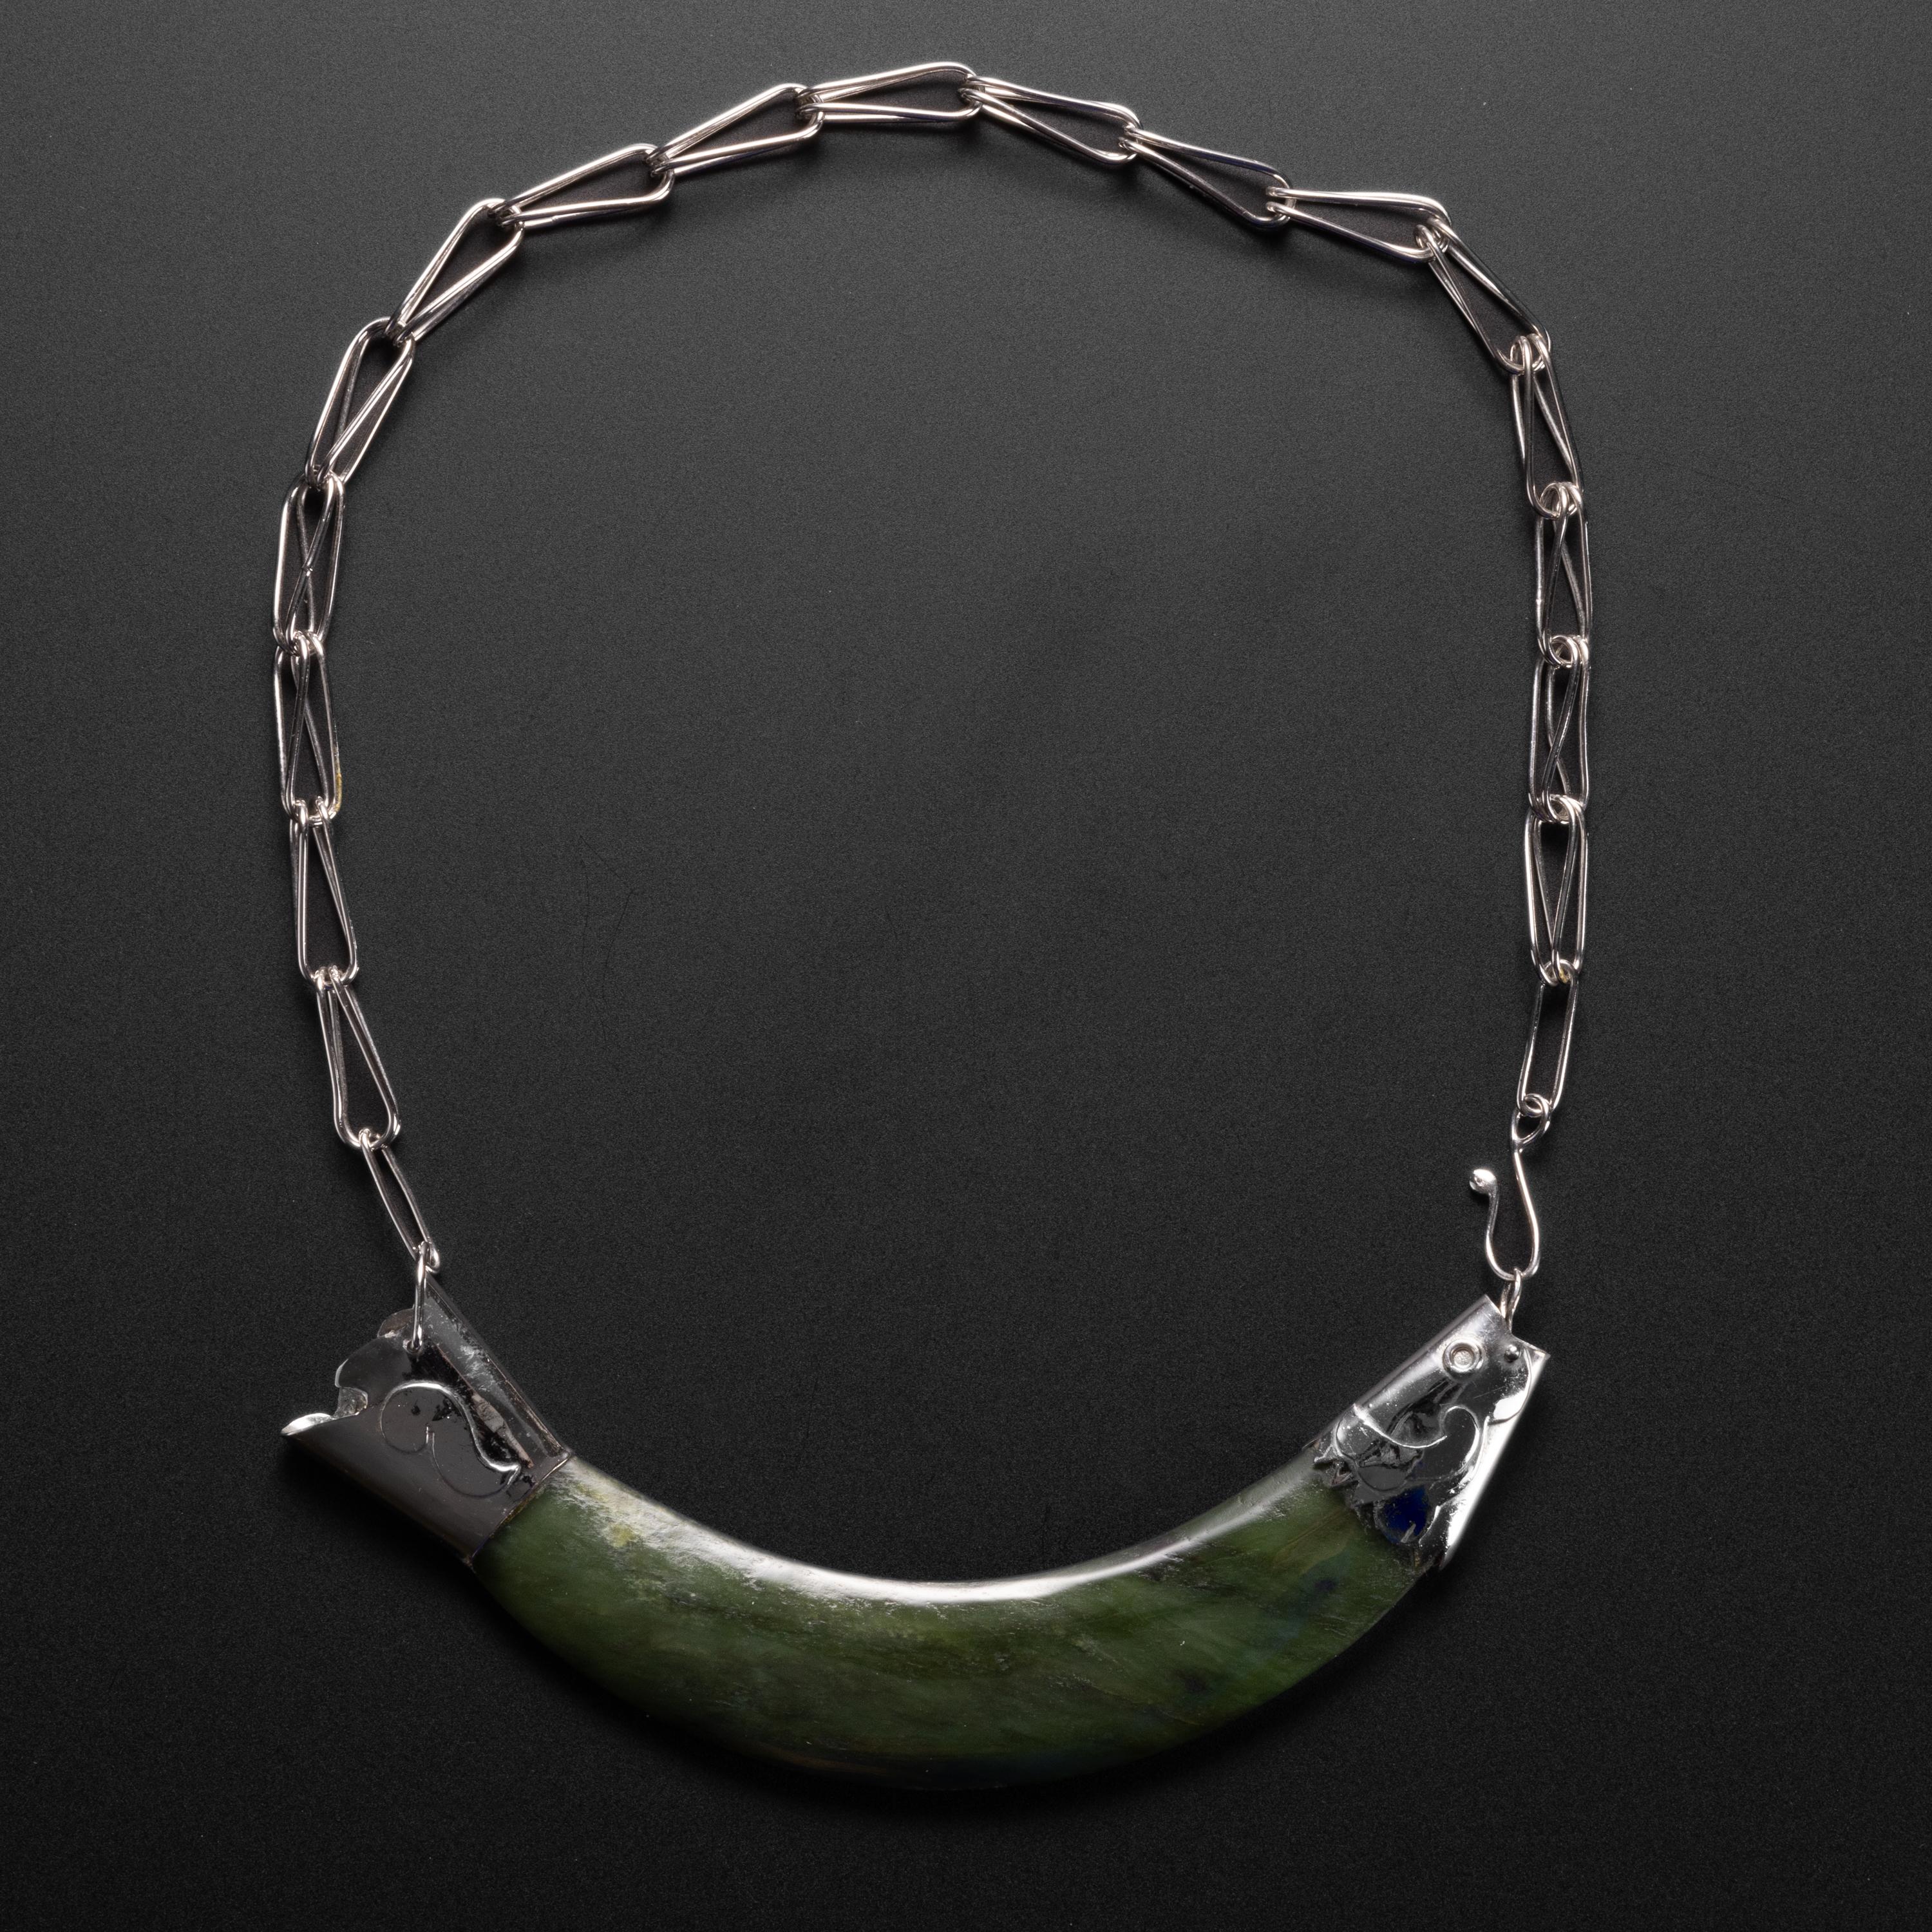 This rare and substantial choker-length necklace was created by Arthur Court Designs in 1976 from sterling silver and a sizeable carved nephrite stone. The necklace depicts a fish and the clever hook joins the necklace at the mouth of the fish.

The